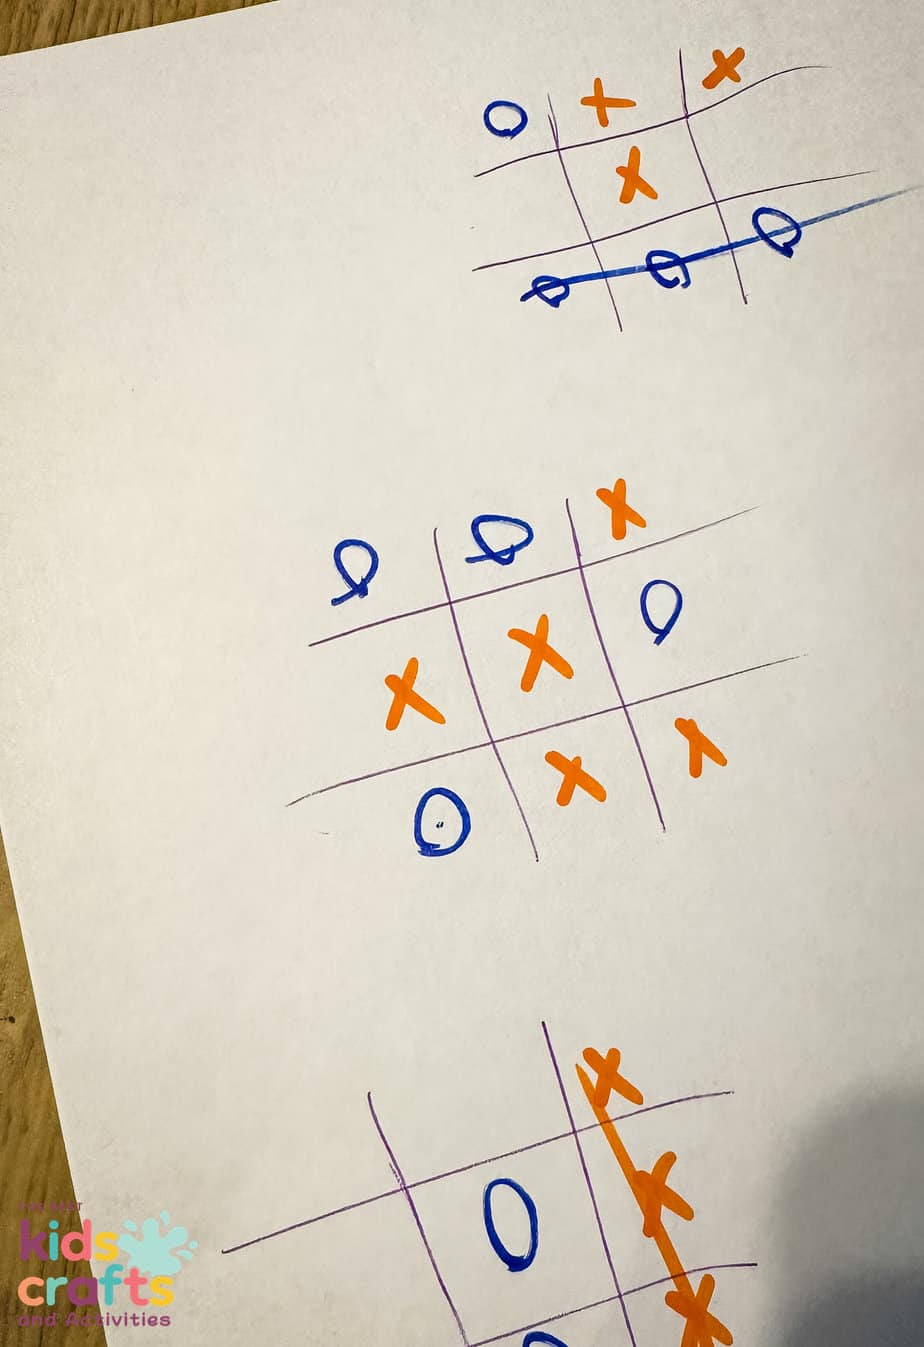 tic tac toe pen and paper game